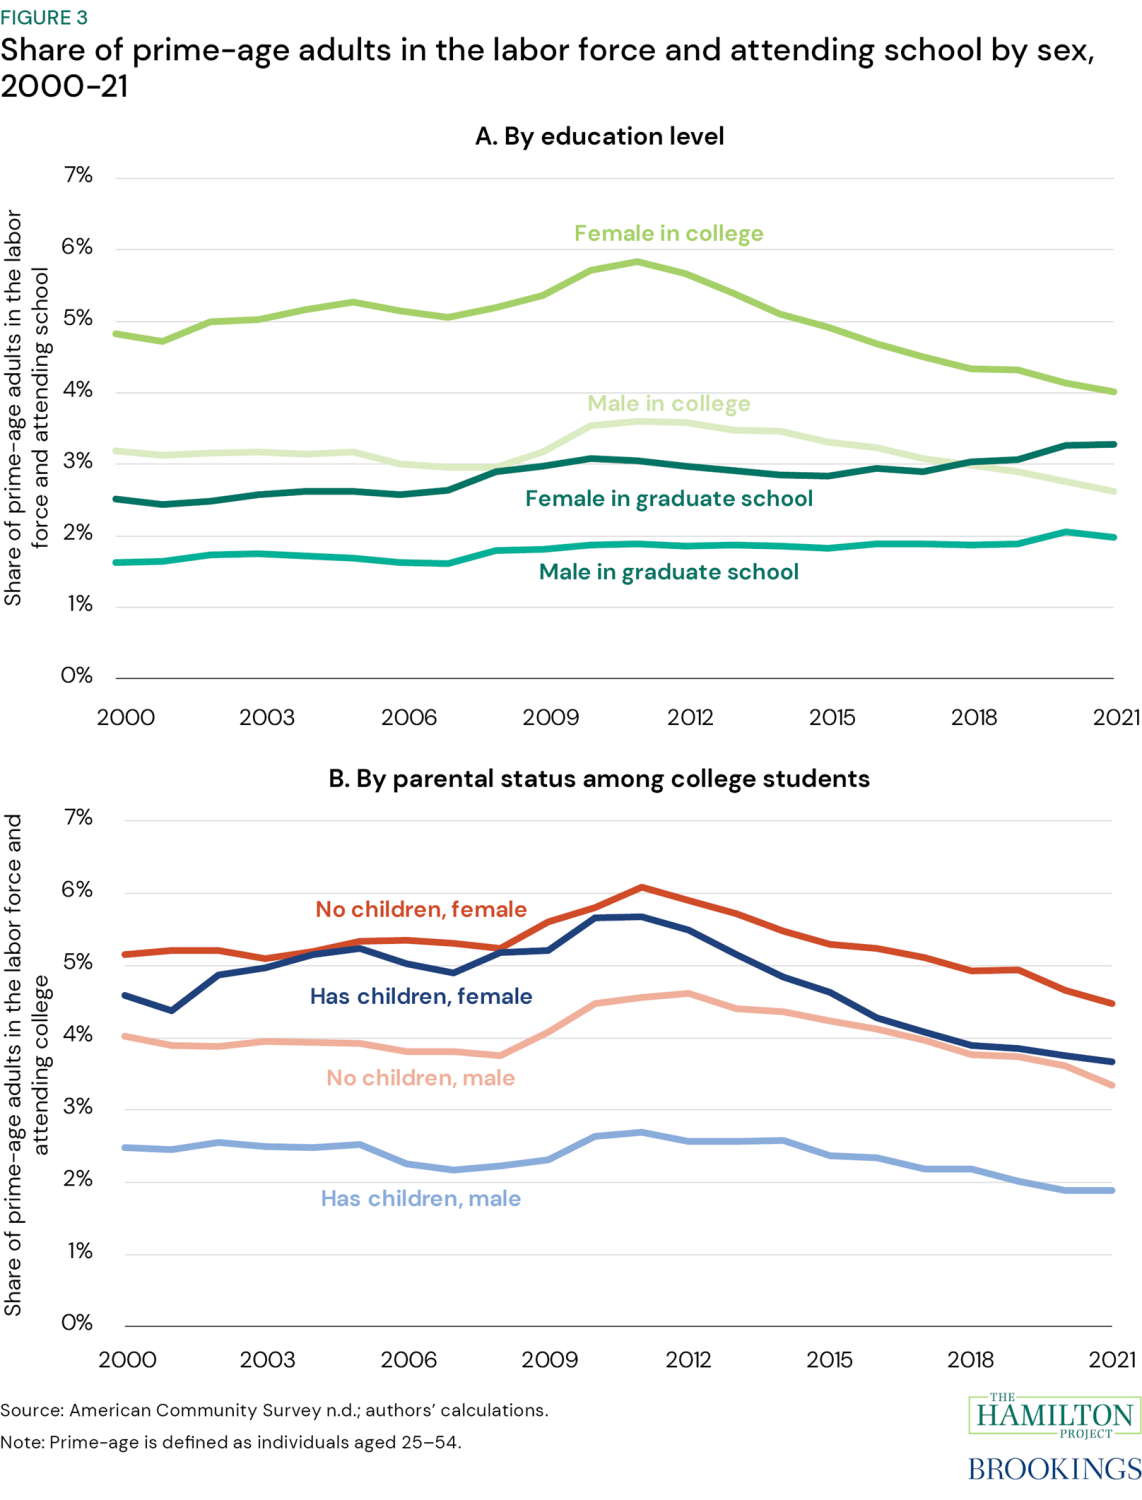 Figure 3: Share of prime-age adults in the labor force and attending school by sex, 2000-21